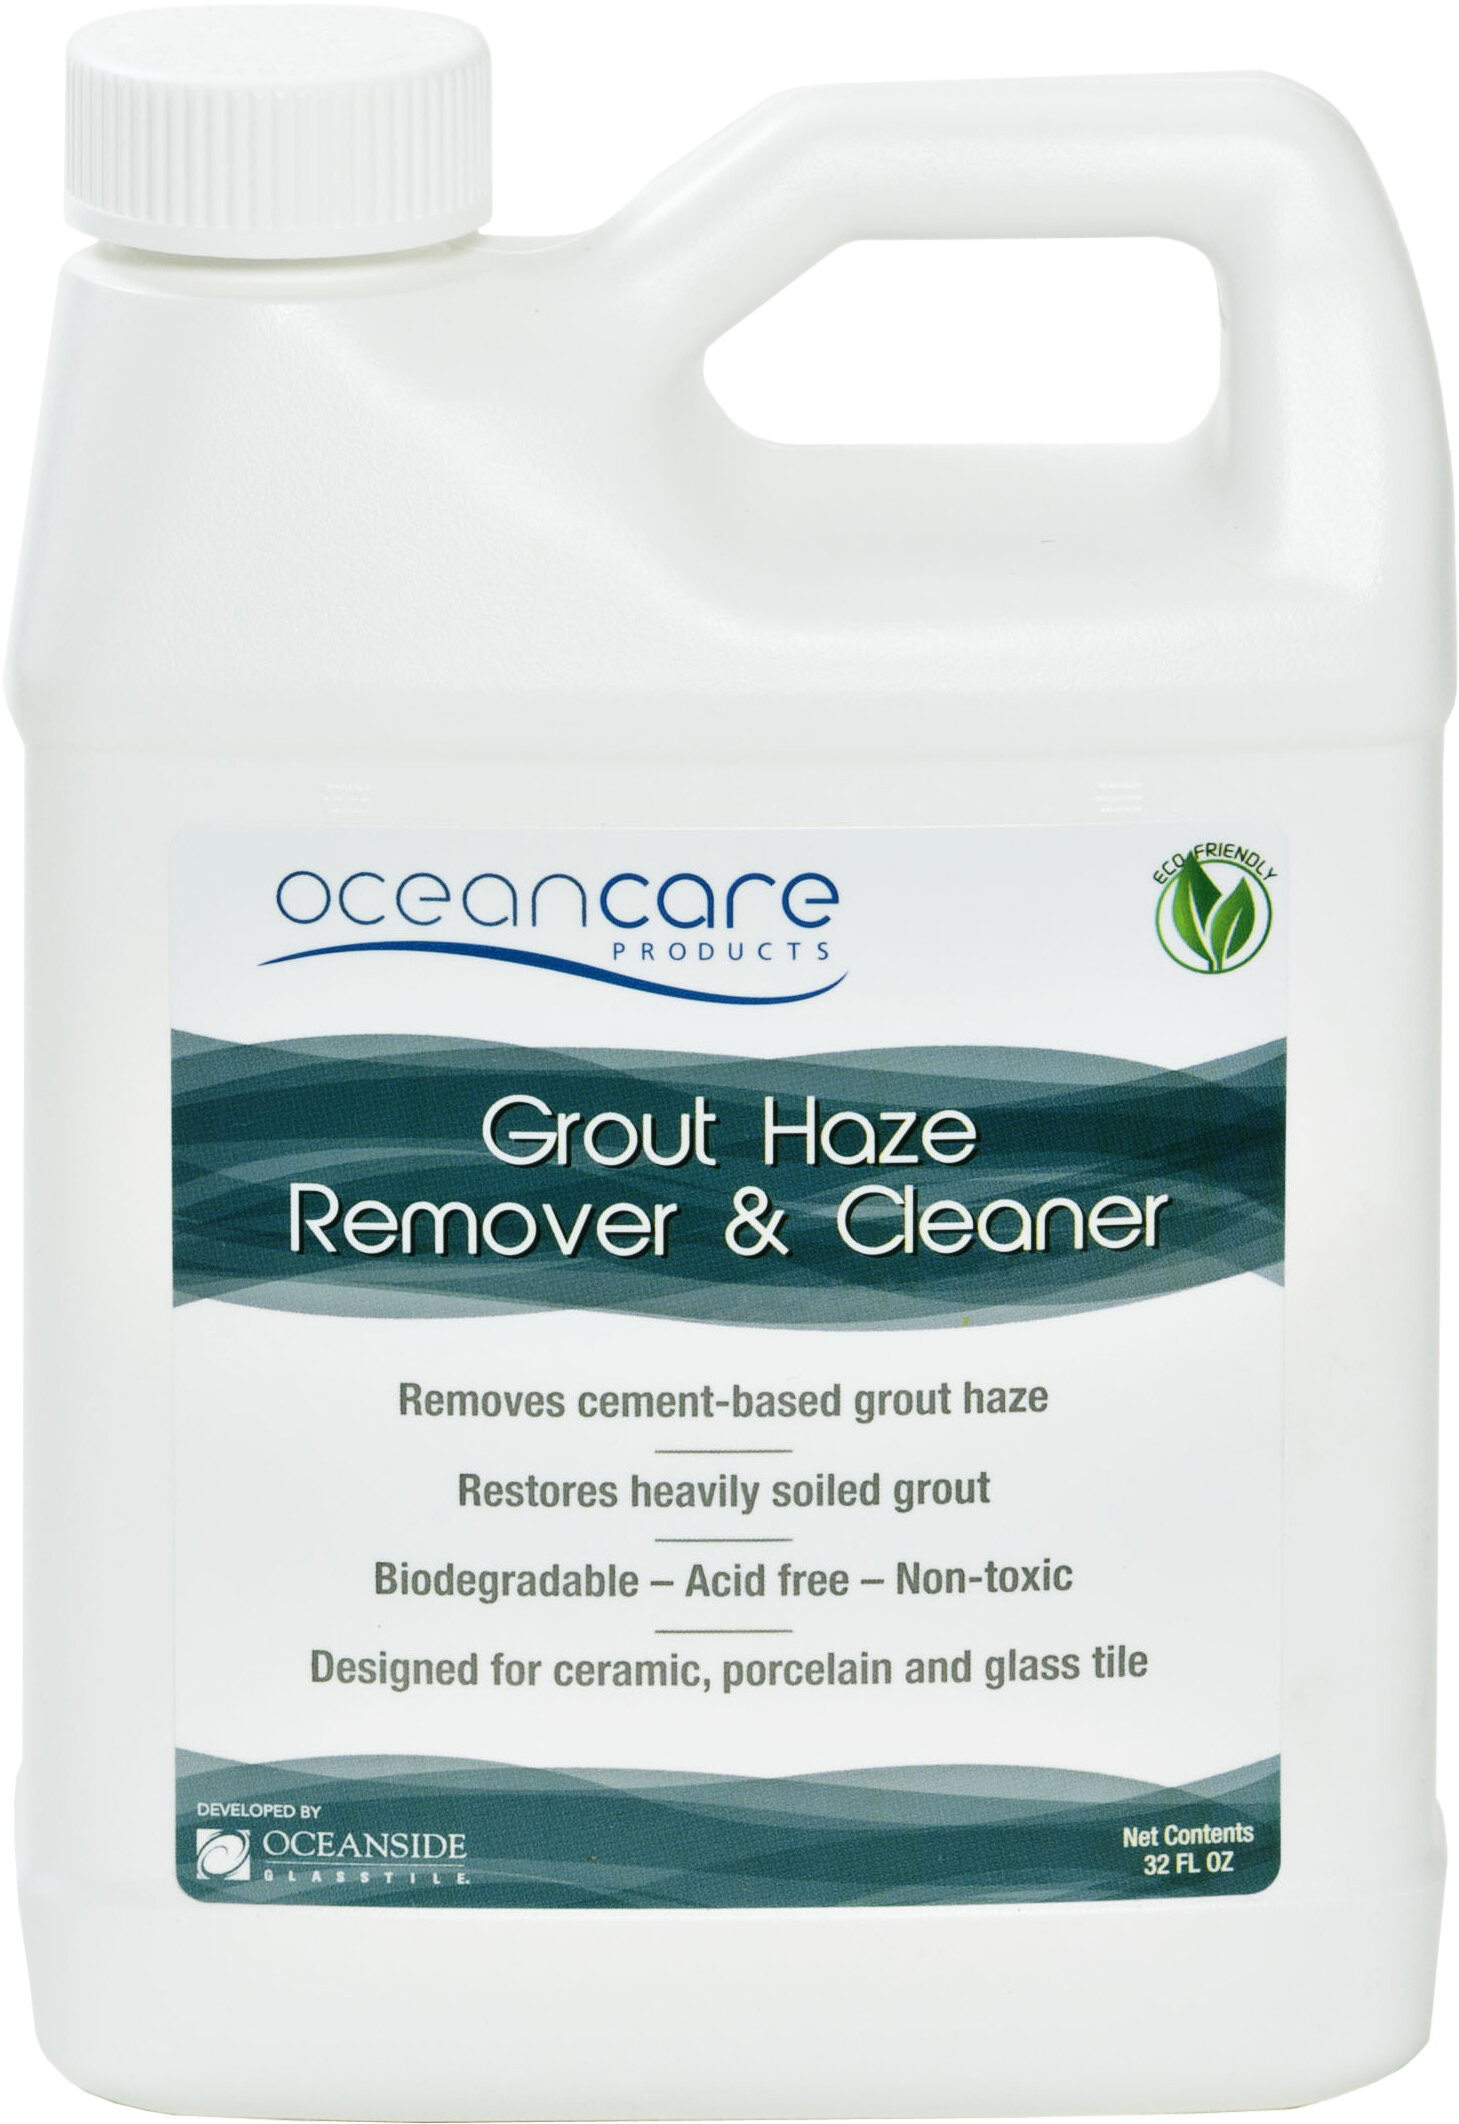 Oceancare Products Grout Haze Remover & Cleaner Quart | Wayfair